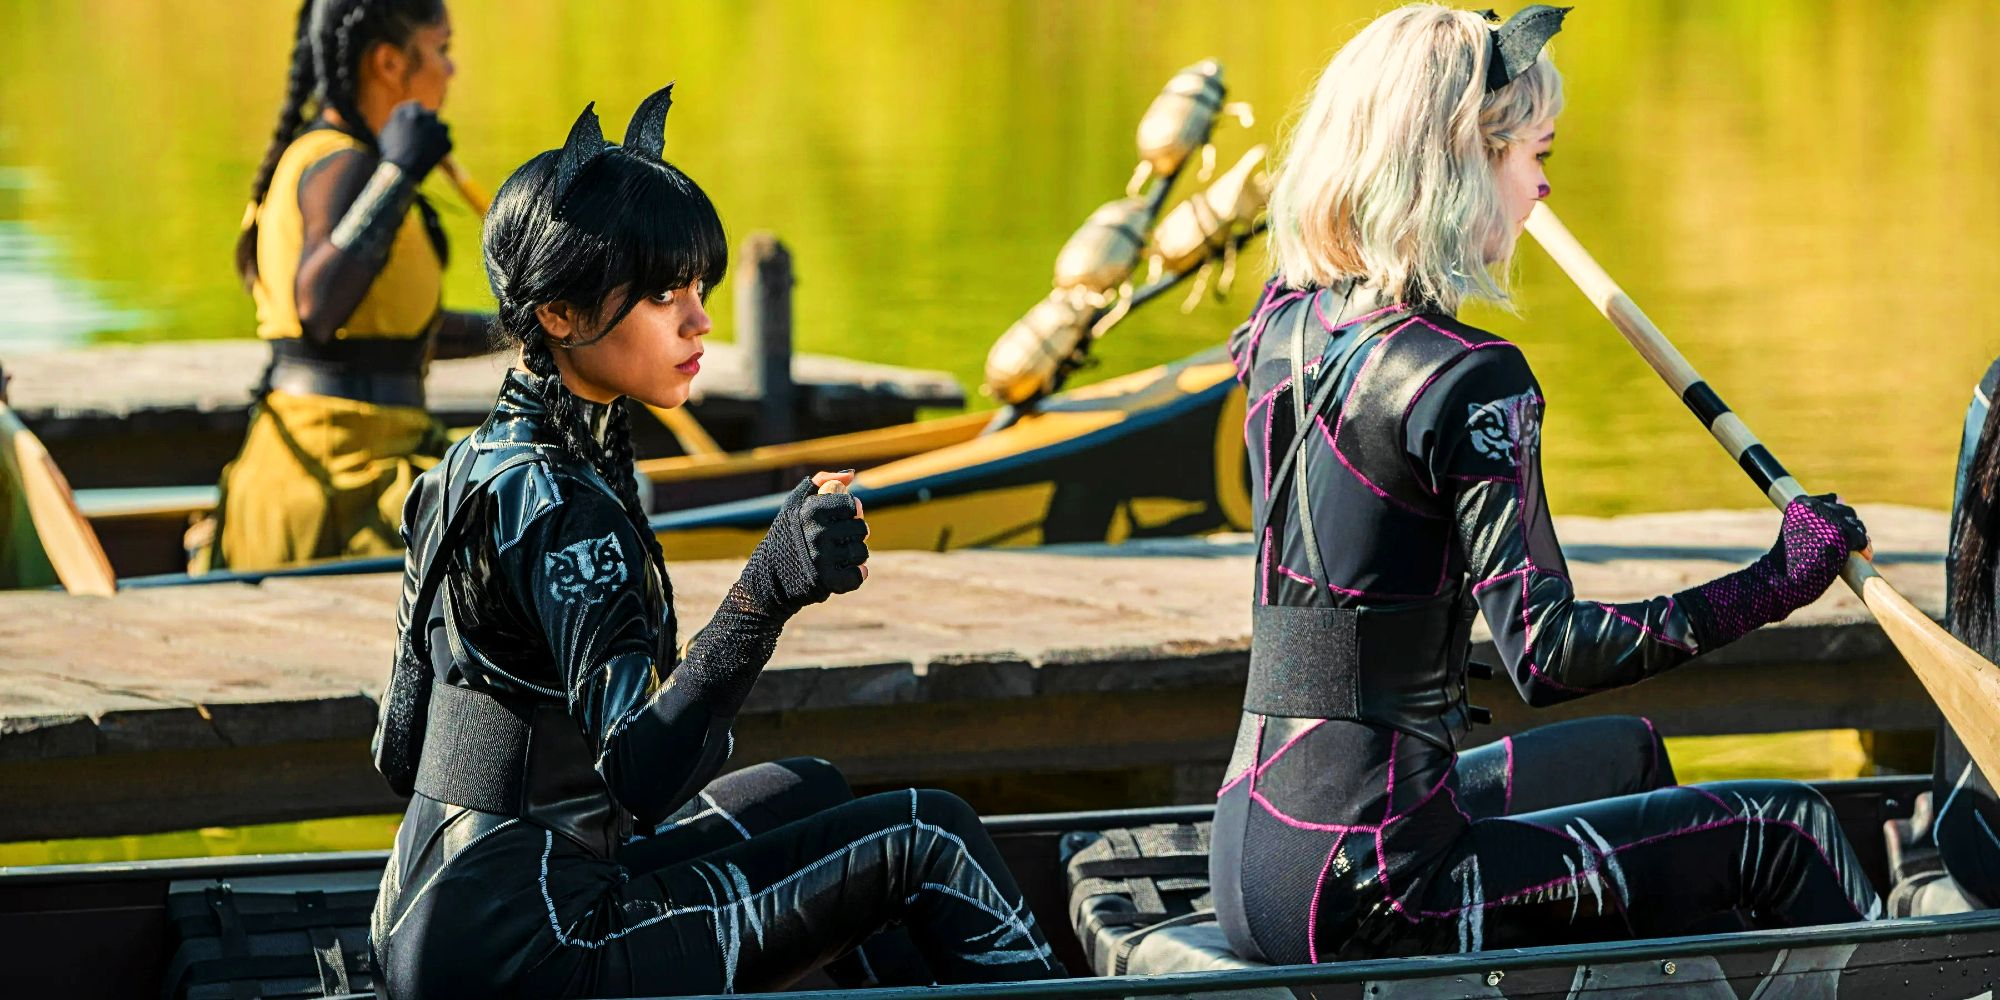 Jenna Ortega as Wednesday Addams and Emma Myers as Enid Sinclair wearing catsuits and rowing in Wednesday